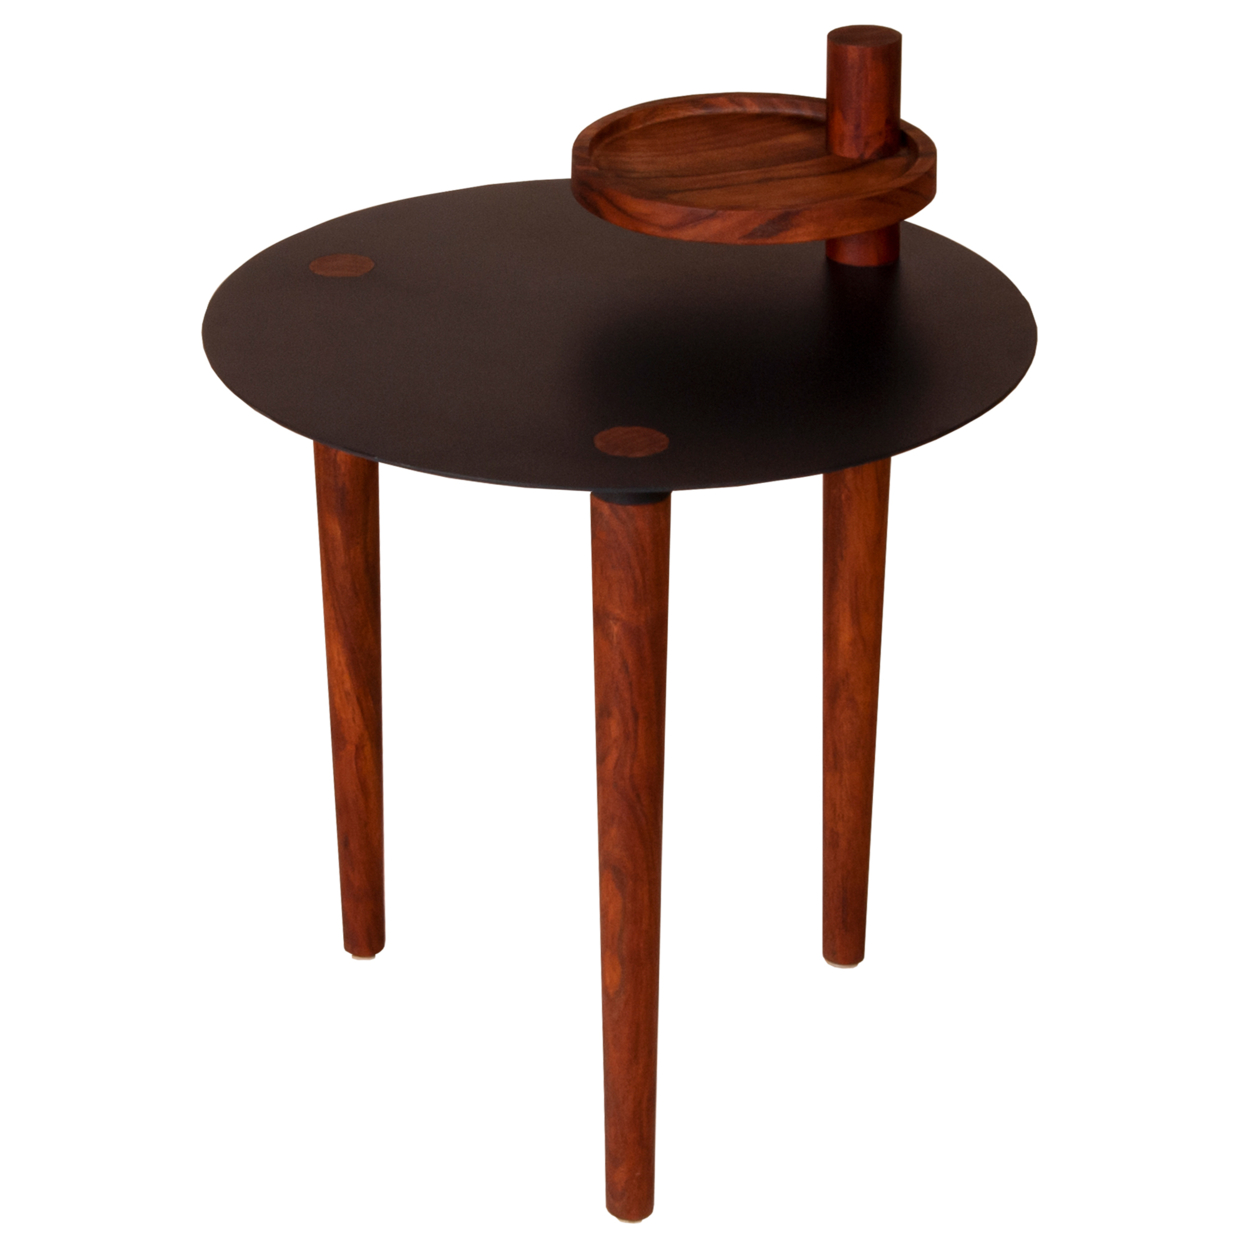 25.6 Inch Round Side Table With Rotatable Tray And Metal Top, Brown And Black- Saltoro Sherpi